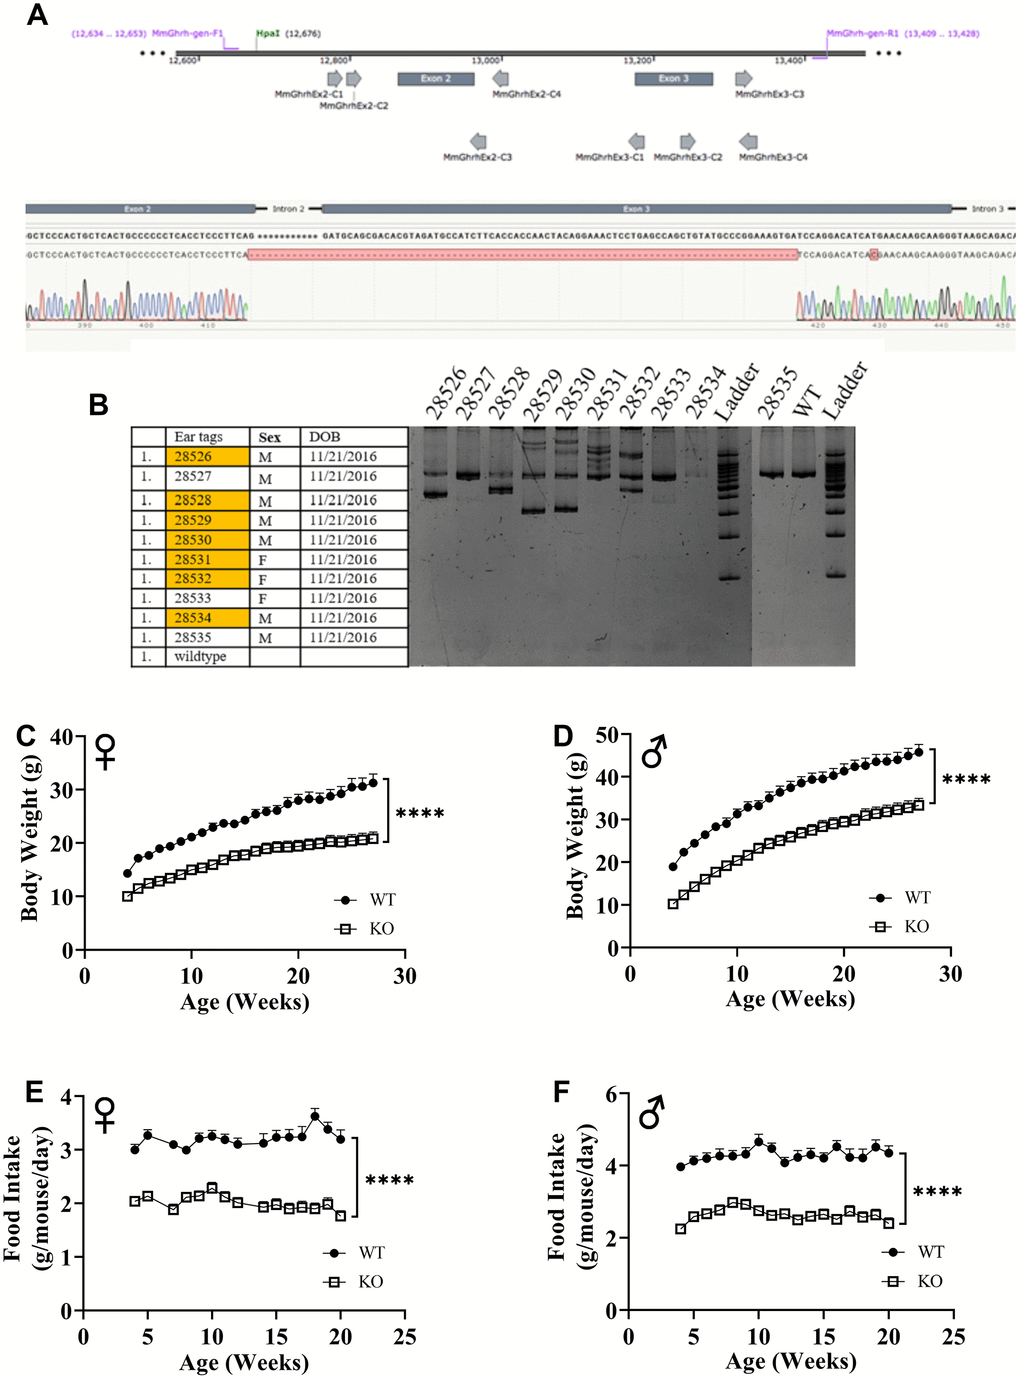 GHRH knockout with CRISPR technology. Location of guide RNAs with respect to exon 2 and exon 3 of GHRH and DNA sequencing chromatogram of mutant GHRH gene between exon 2 and intron 3. (A) Identification of mutations introduced by CRISPR/Cas9 in GHRH gene in founder animals by PCR analysis. (B) 10 G0 pups were tested for indels or deletions. 28528 had a 291 base pairs deletion that eliminates the splice donor site at exon 2, intron 2-3 and a large part of Exon 3 (77 base pairs out of 102 base pairs), showed successful germline transmission. (B) Body weights of female (C) and male (D) WT and GHRH-/- mice from weaning to adulthood. Food intake per mice per day of female (E) and male (F) WT and GHRH-/- mice. Female WT n=11, GHRH-/- n=14, male WT n=11, GHRH-/- n=15. Each bar represents mean ± SEM. Statistical analysis was performed by unpaired Student’s t-test with Welch’s correction; ****p